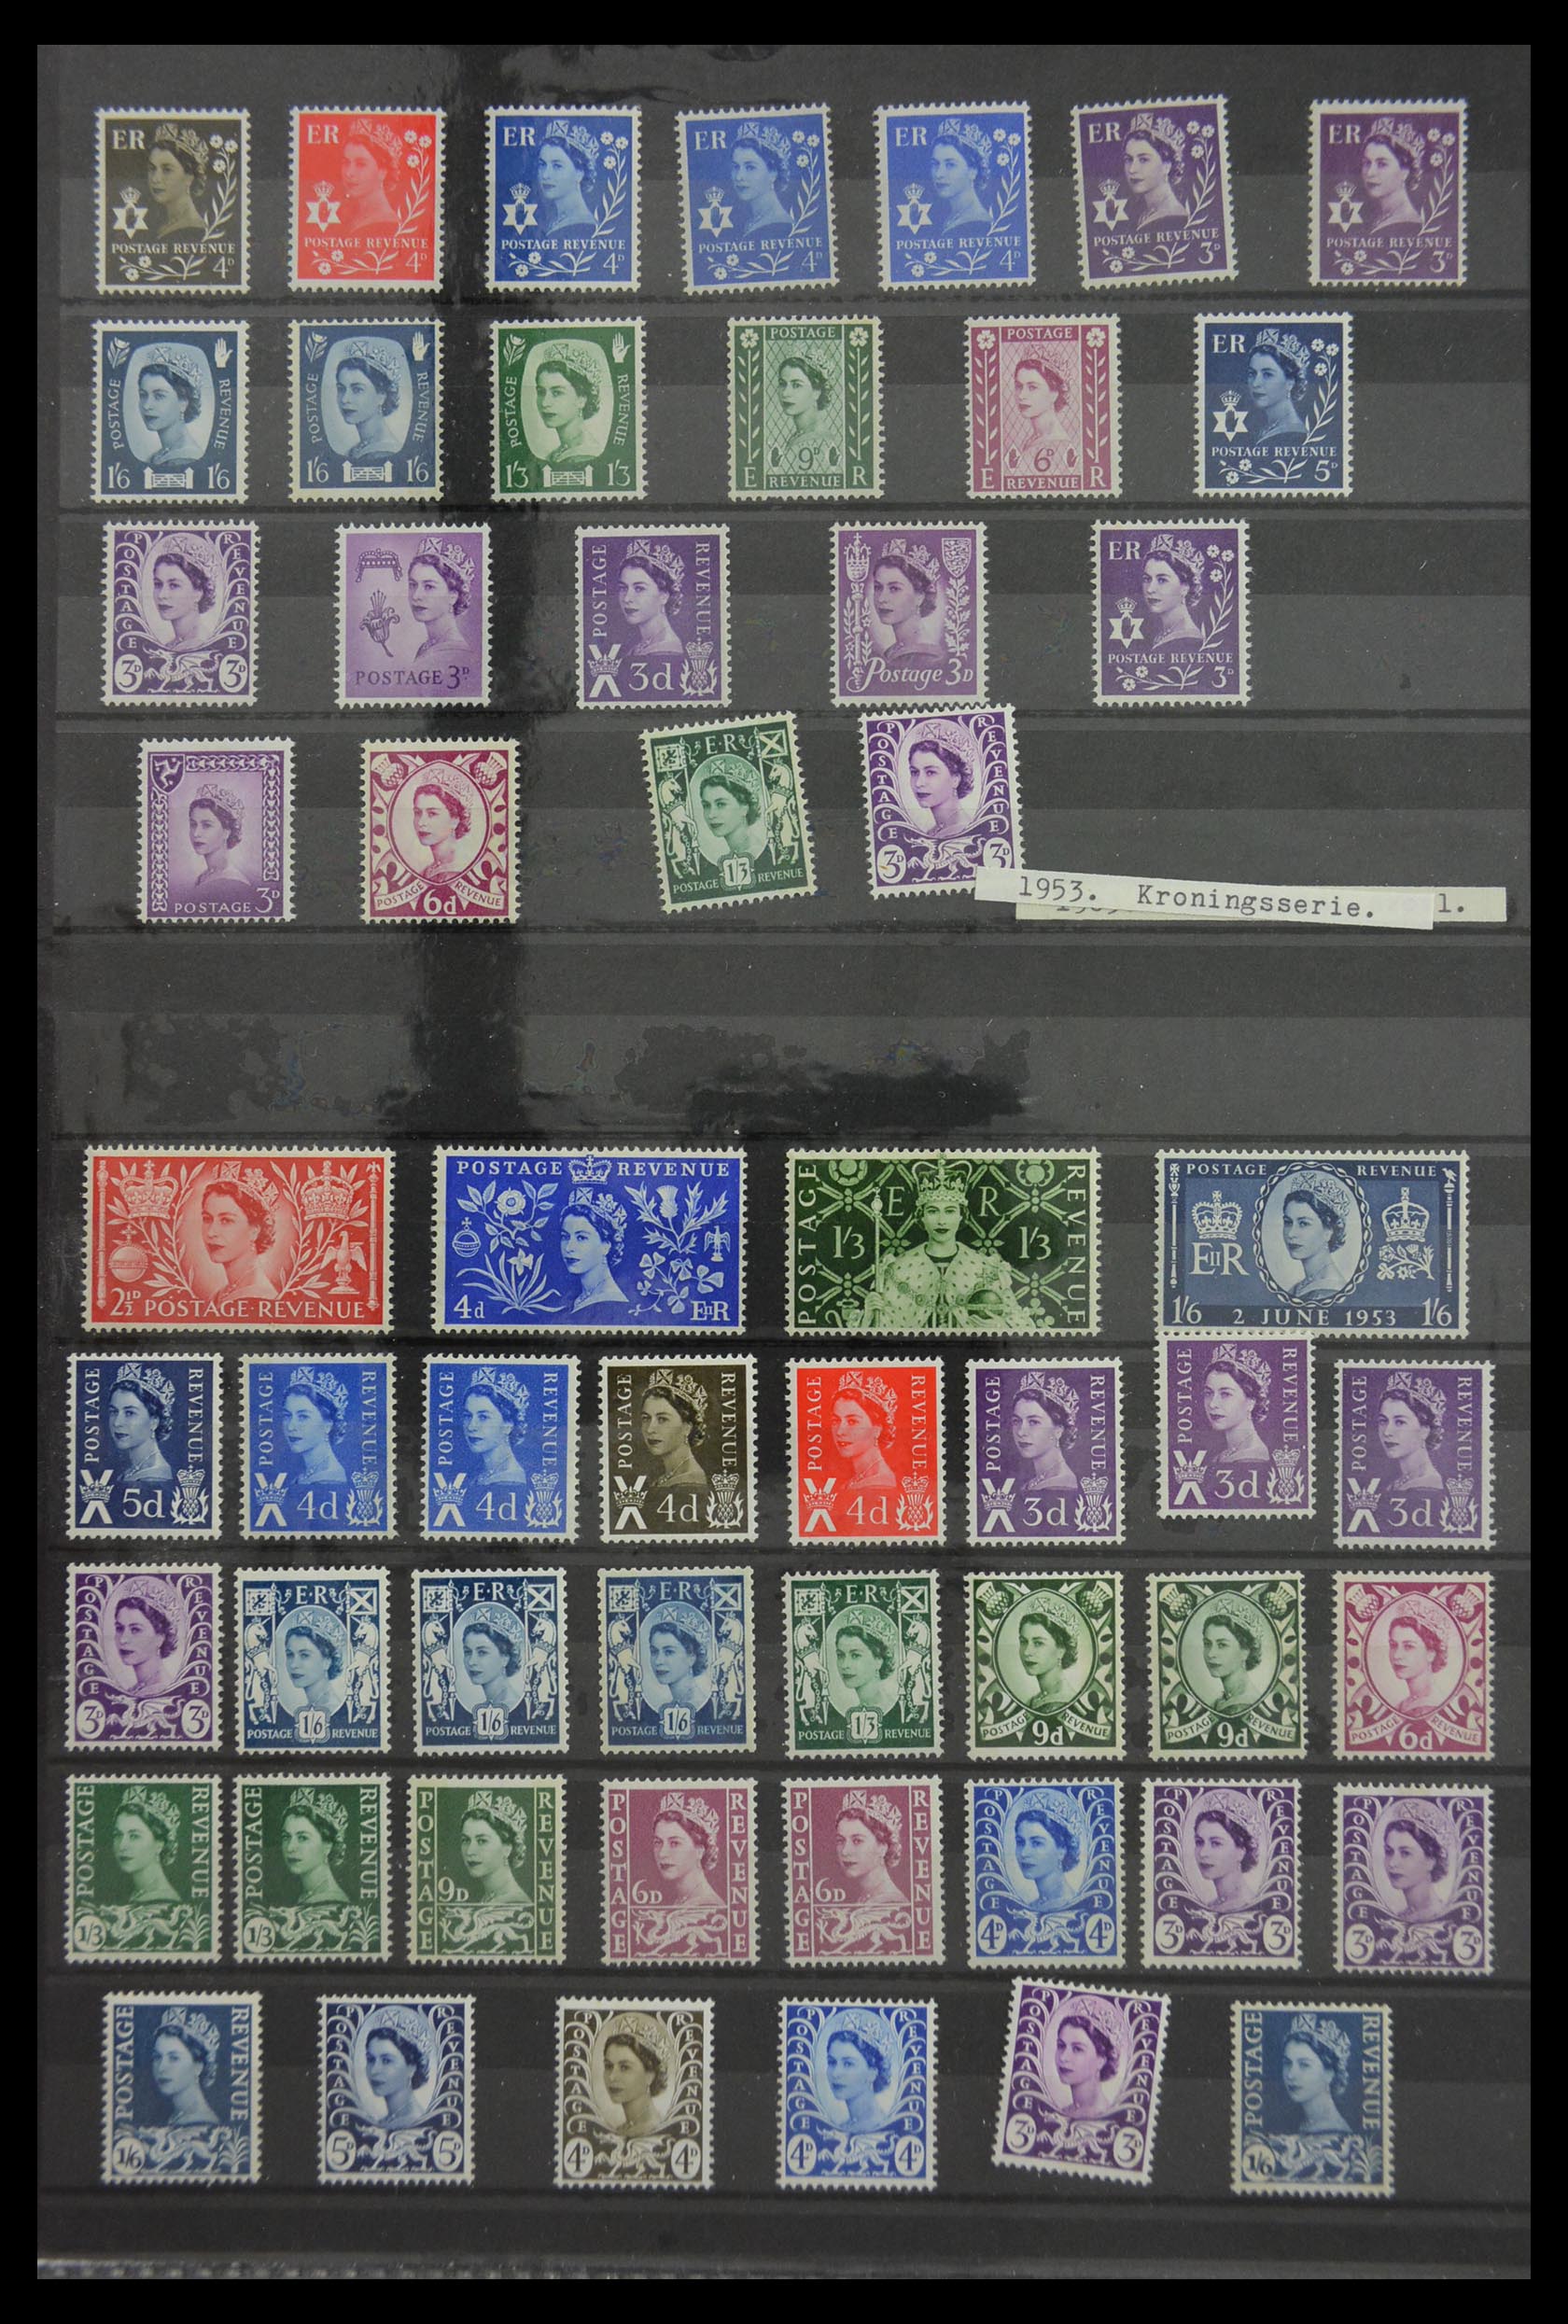 29940 438 - 29940 Great Britain and Colonies 1920-1970.